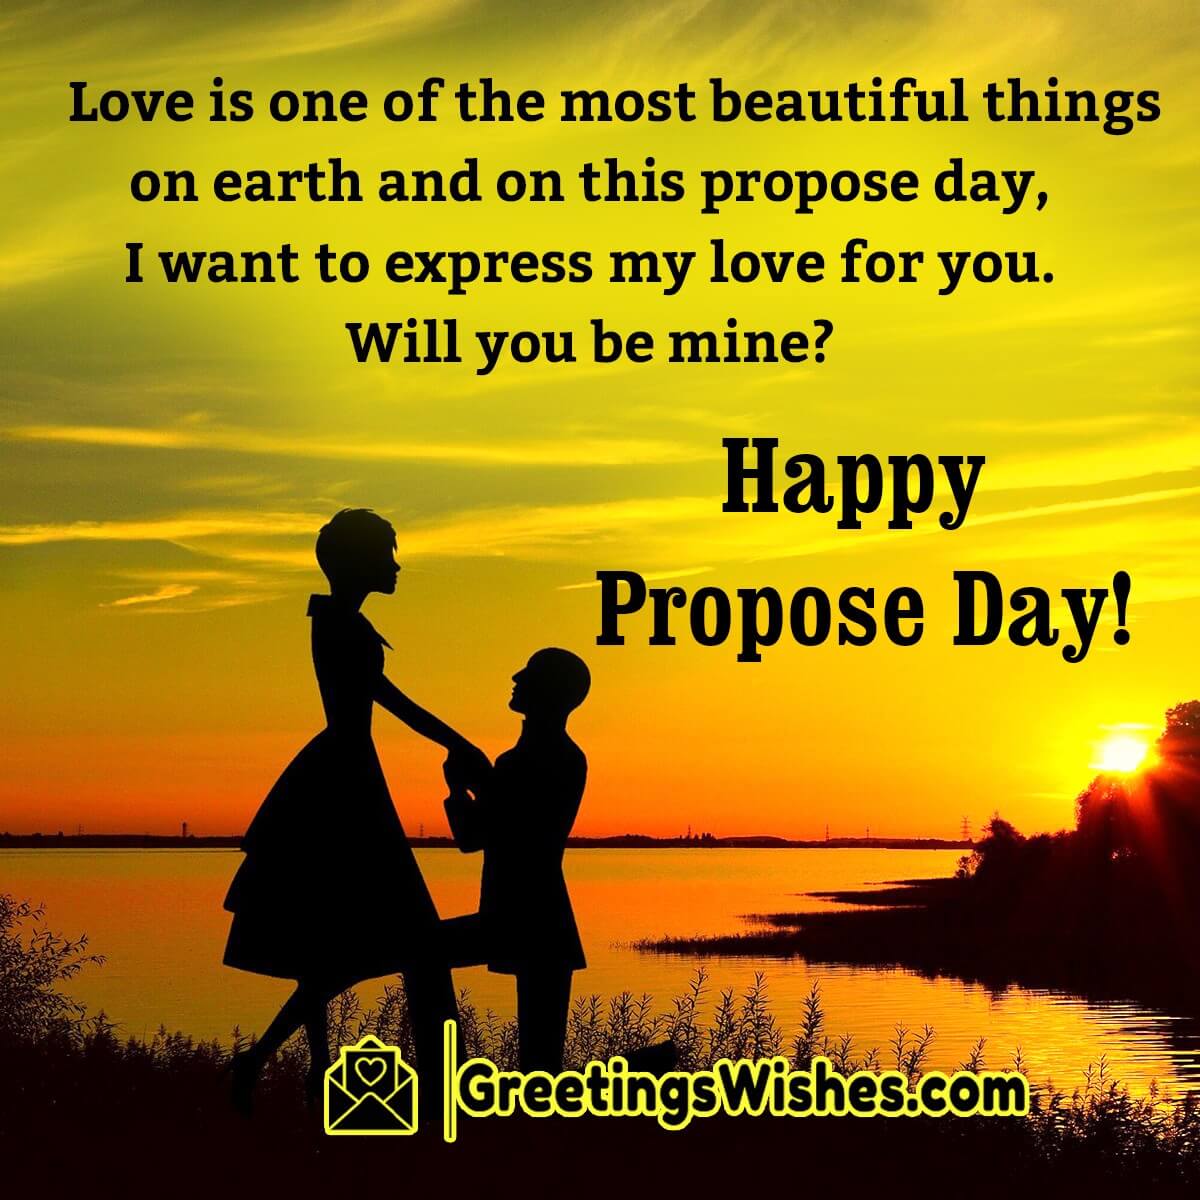 Happy Propose Day Quote Wishes